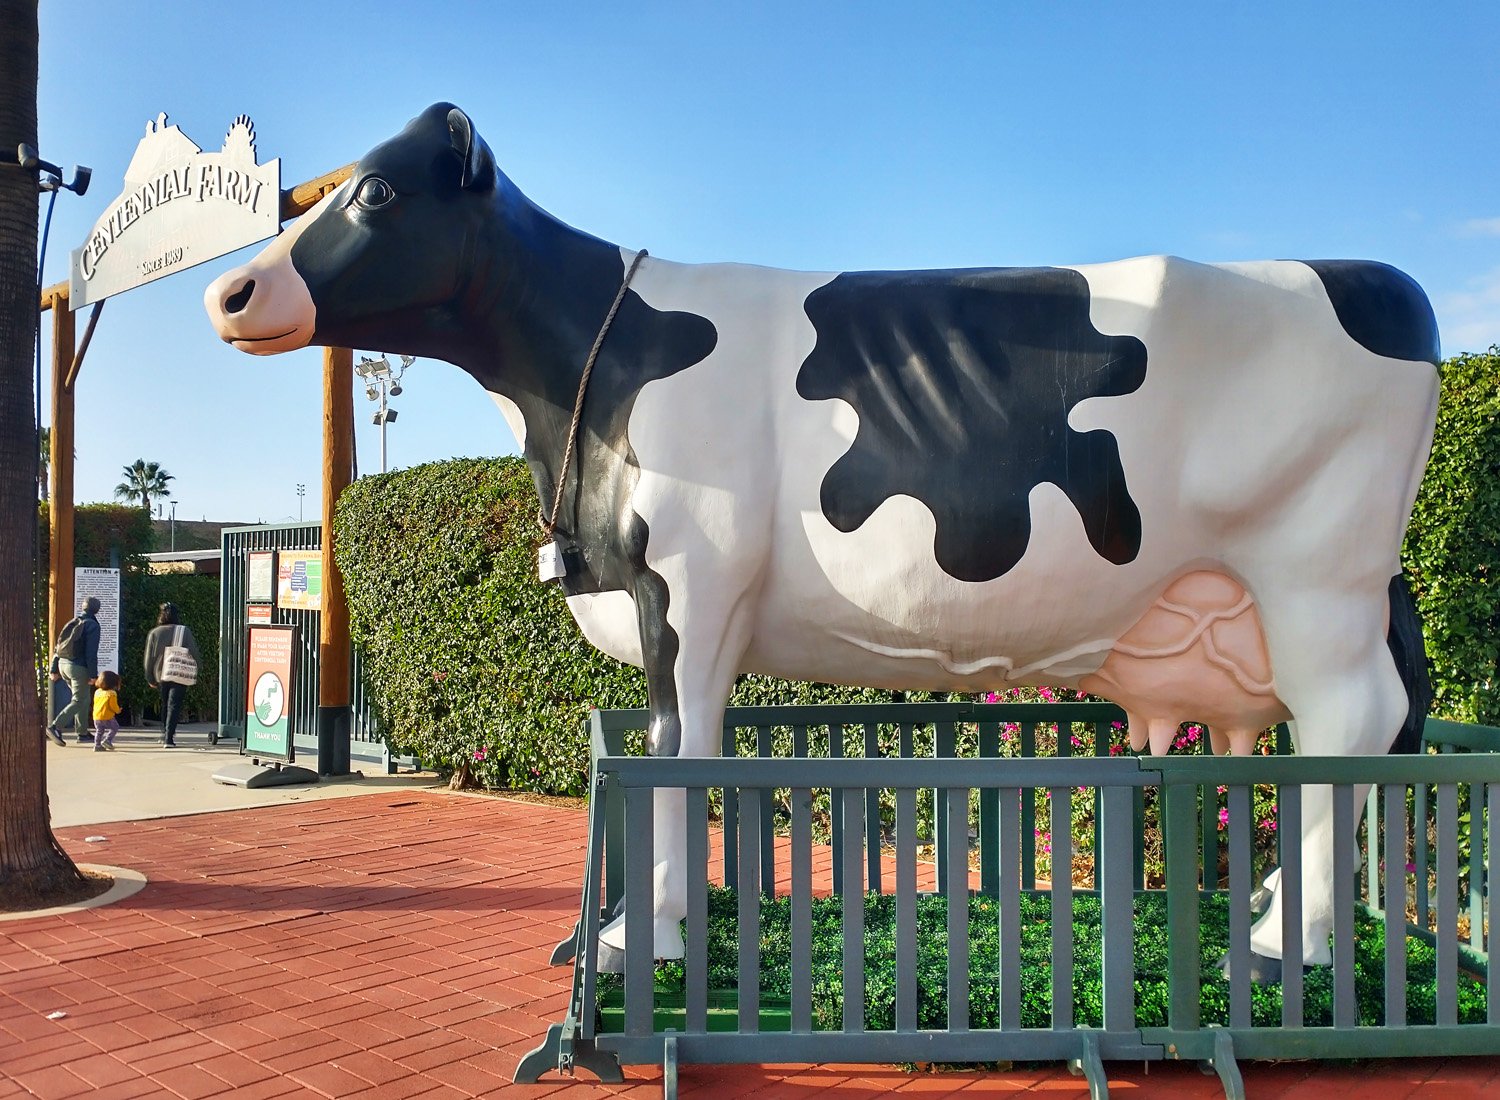 Then this giant cow, instead of the promised Cannibalistic Hot Dog that is on closed fairgrounds. Gotta watch RoadsideAmerica they keep sending people to inaccessible things.